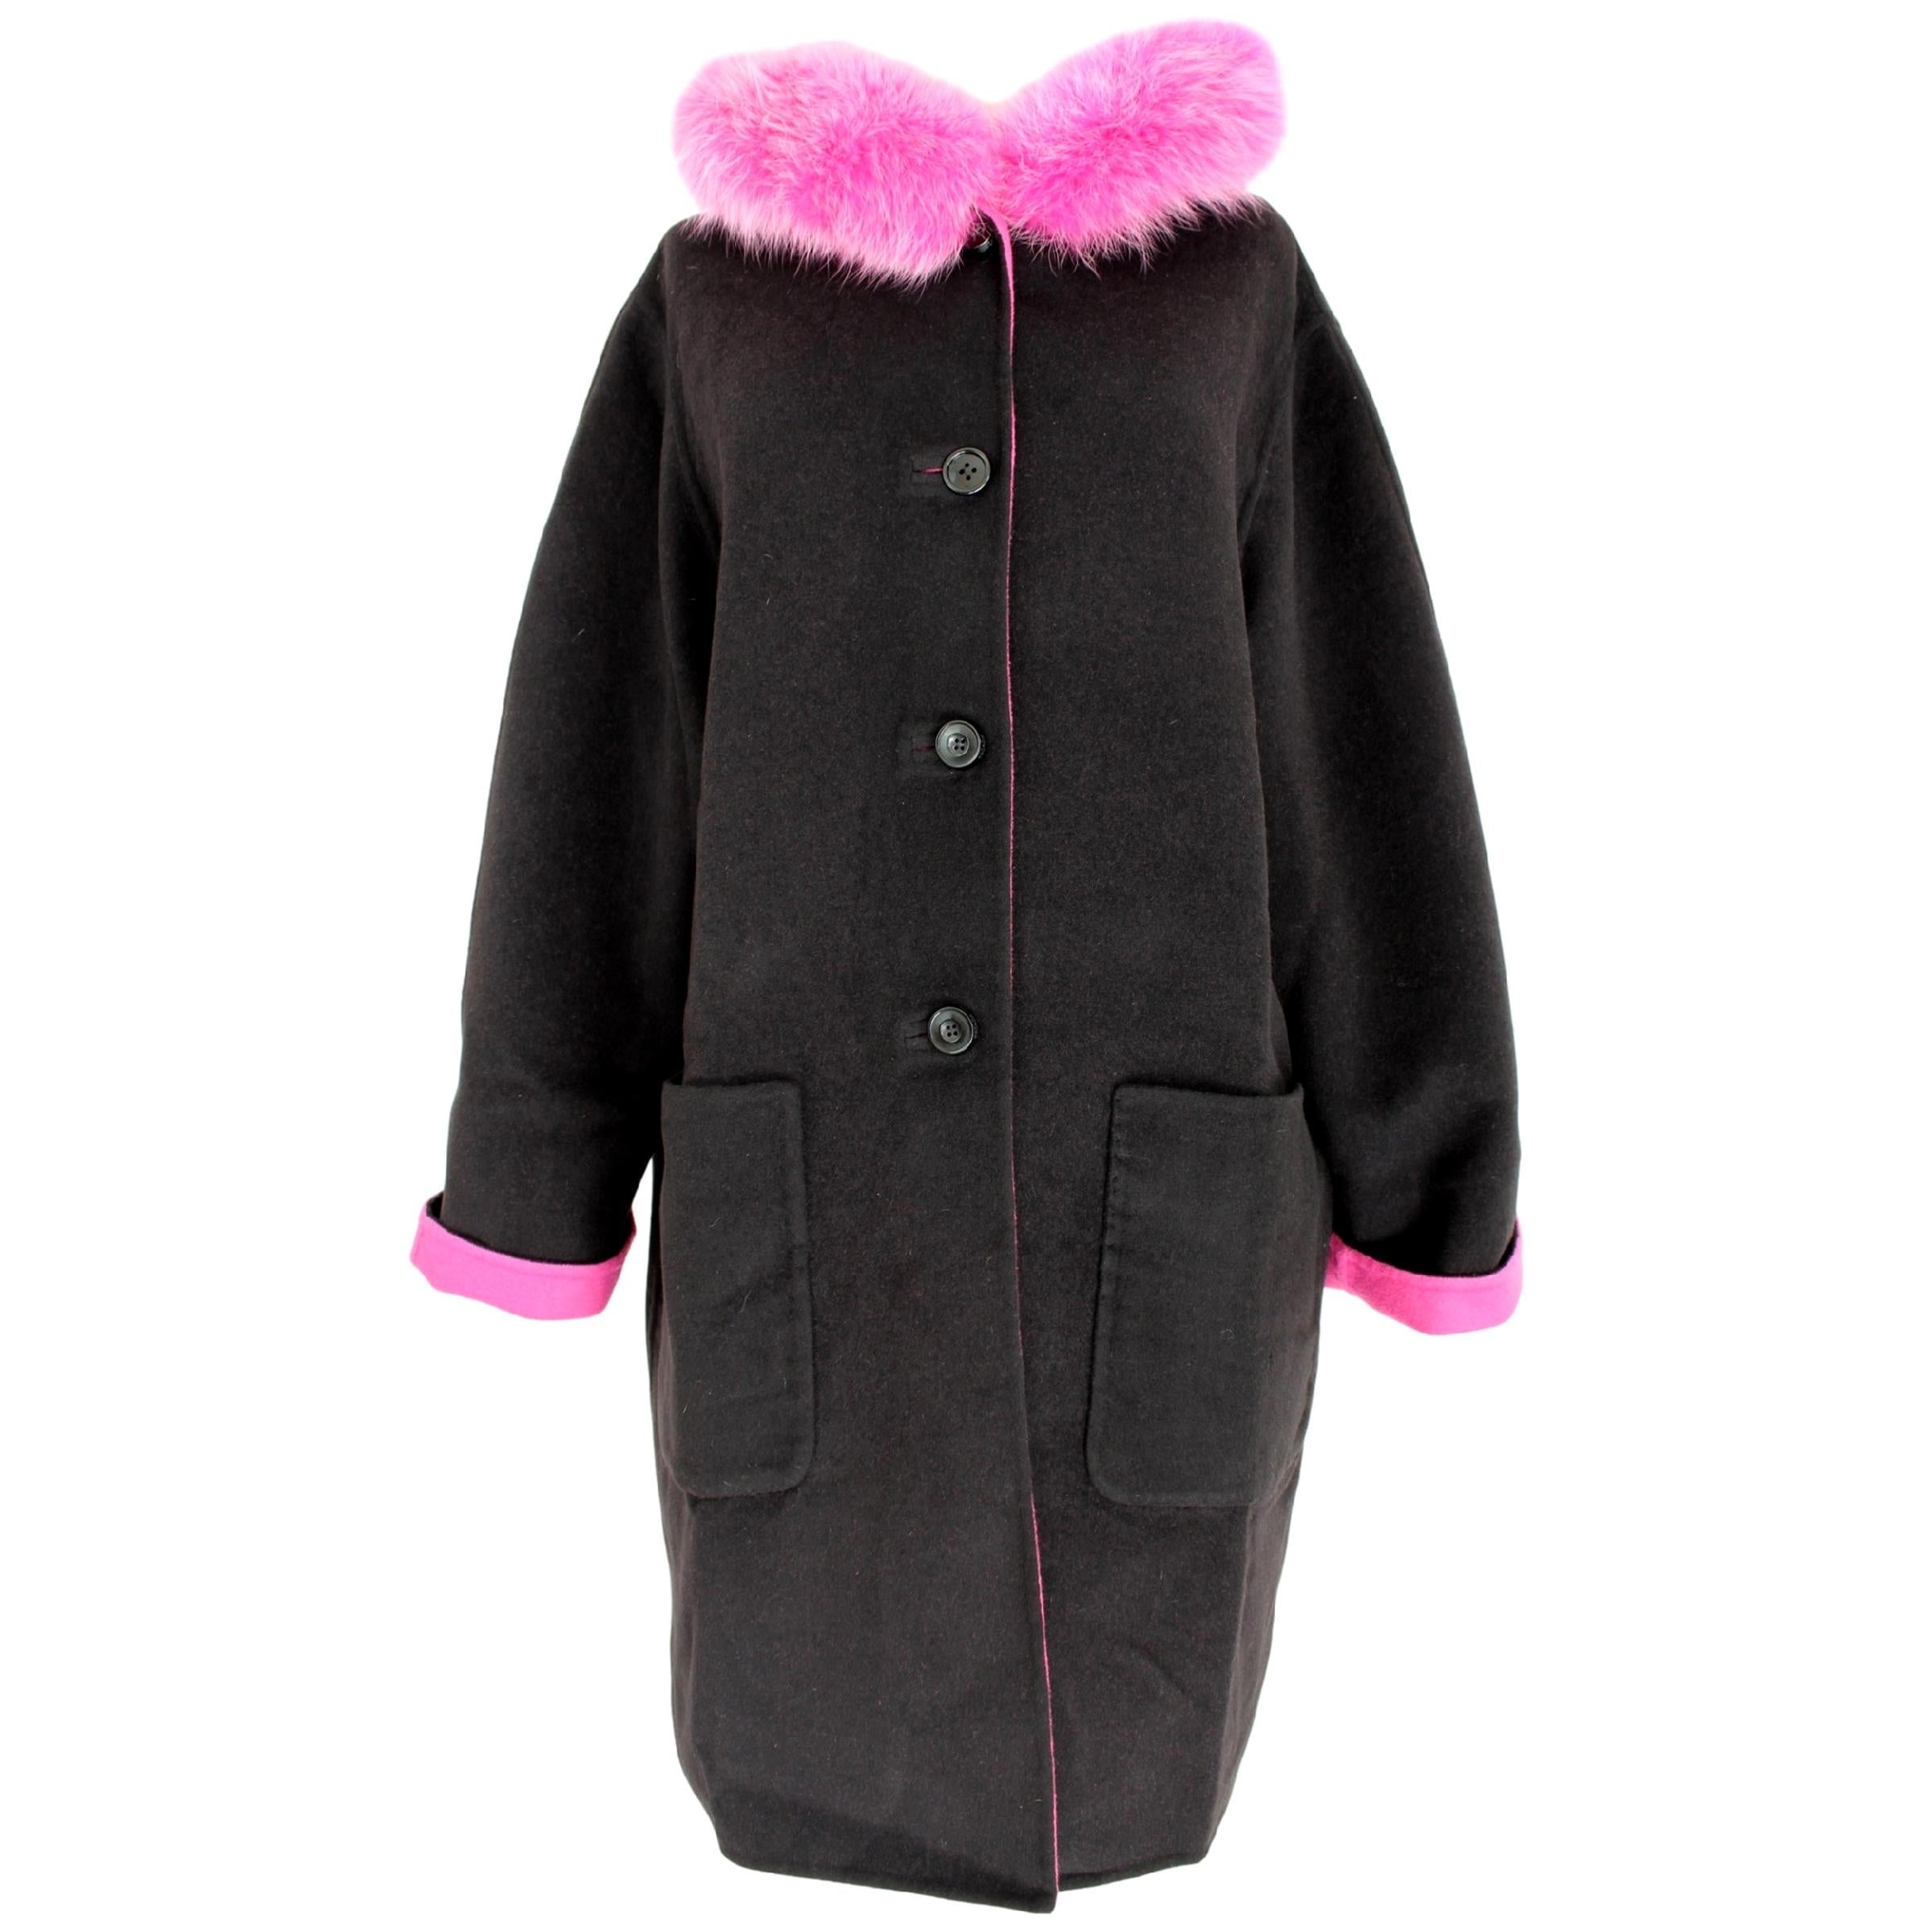 Escada vintage women's coat, double face model black one side, pink on the other. 70% virgin wool 30% angora. Hood edged in pink fox fur. Closure with buttons, two pockets on the sides. 1980s. Made in Italy. Excellent vintage conditions.

Size: 40